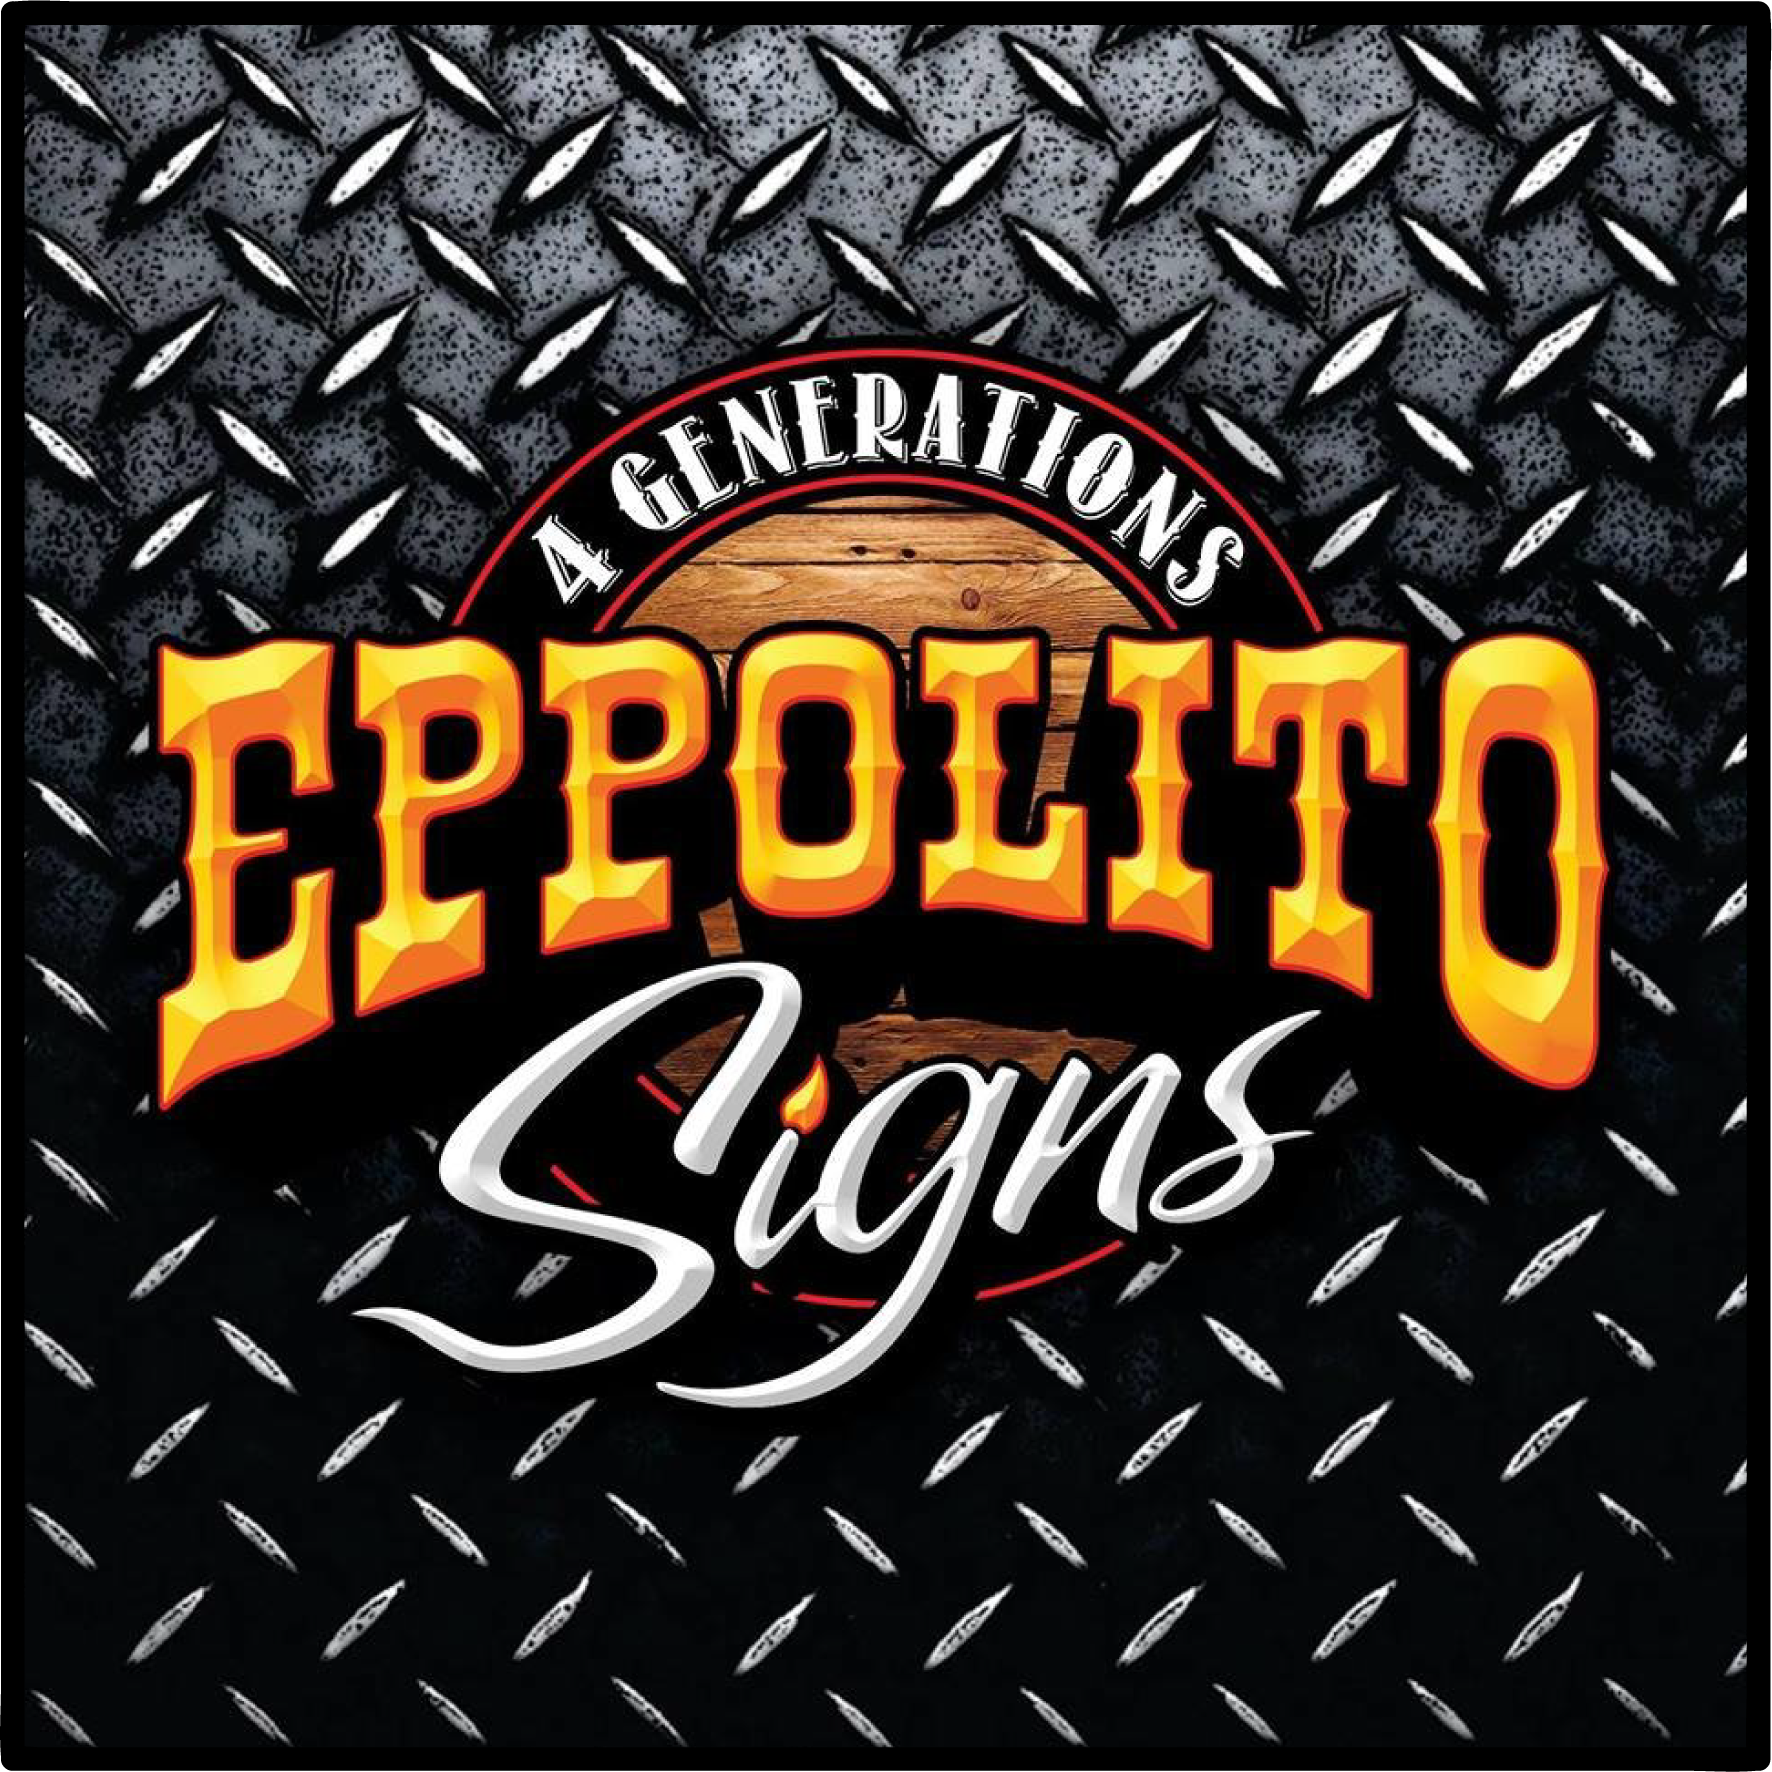 Eppolito Signs.png